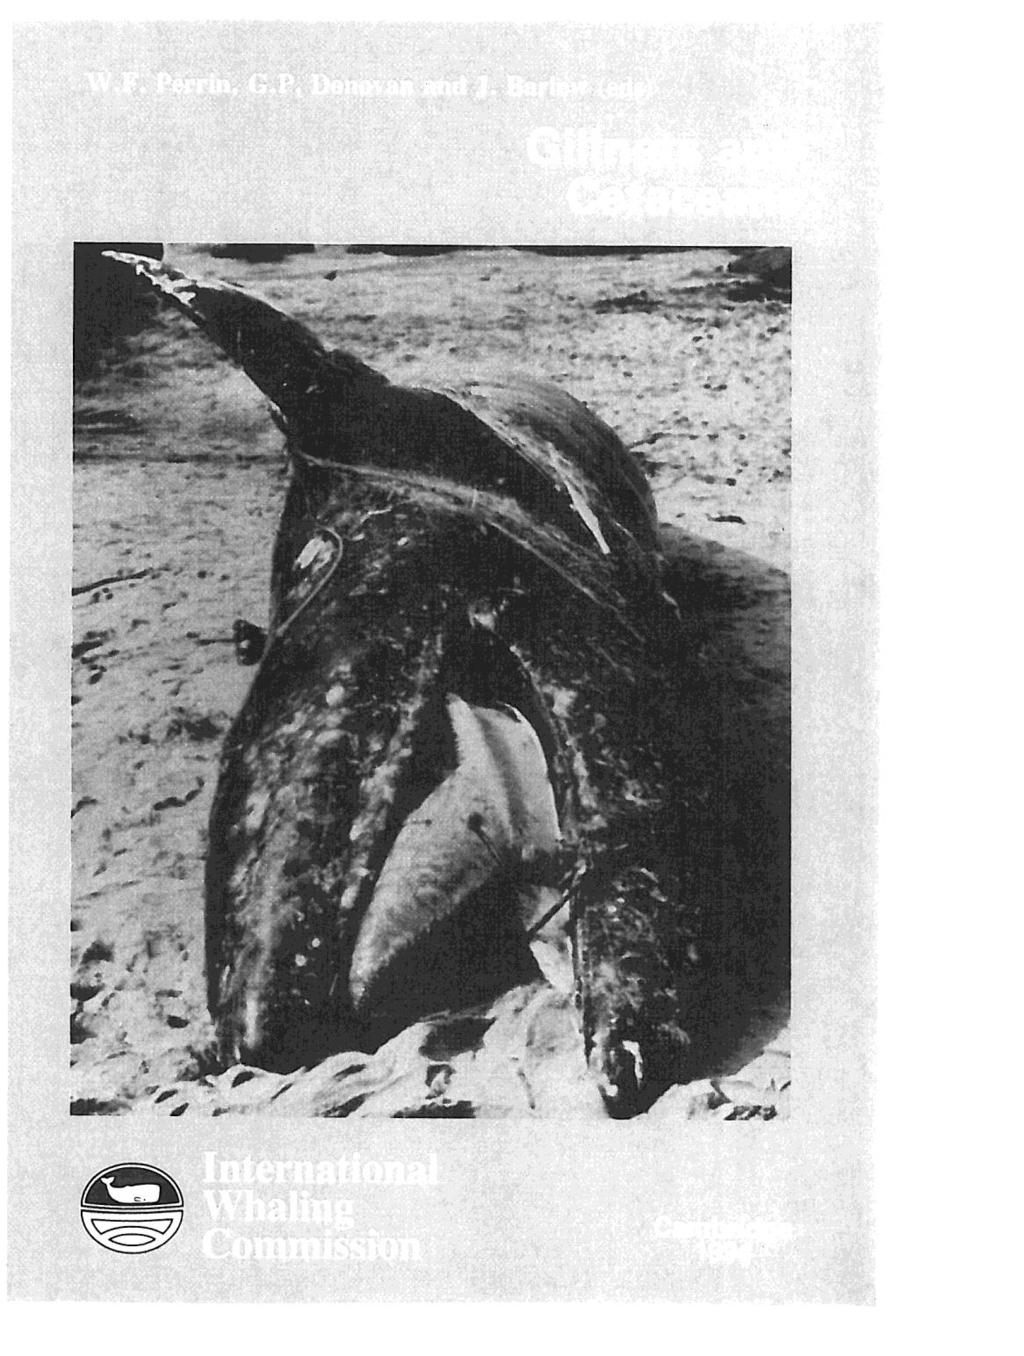 IWC 1990 Symposium and Workshop on the Mortality of Cetaceans